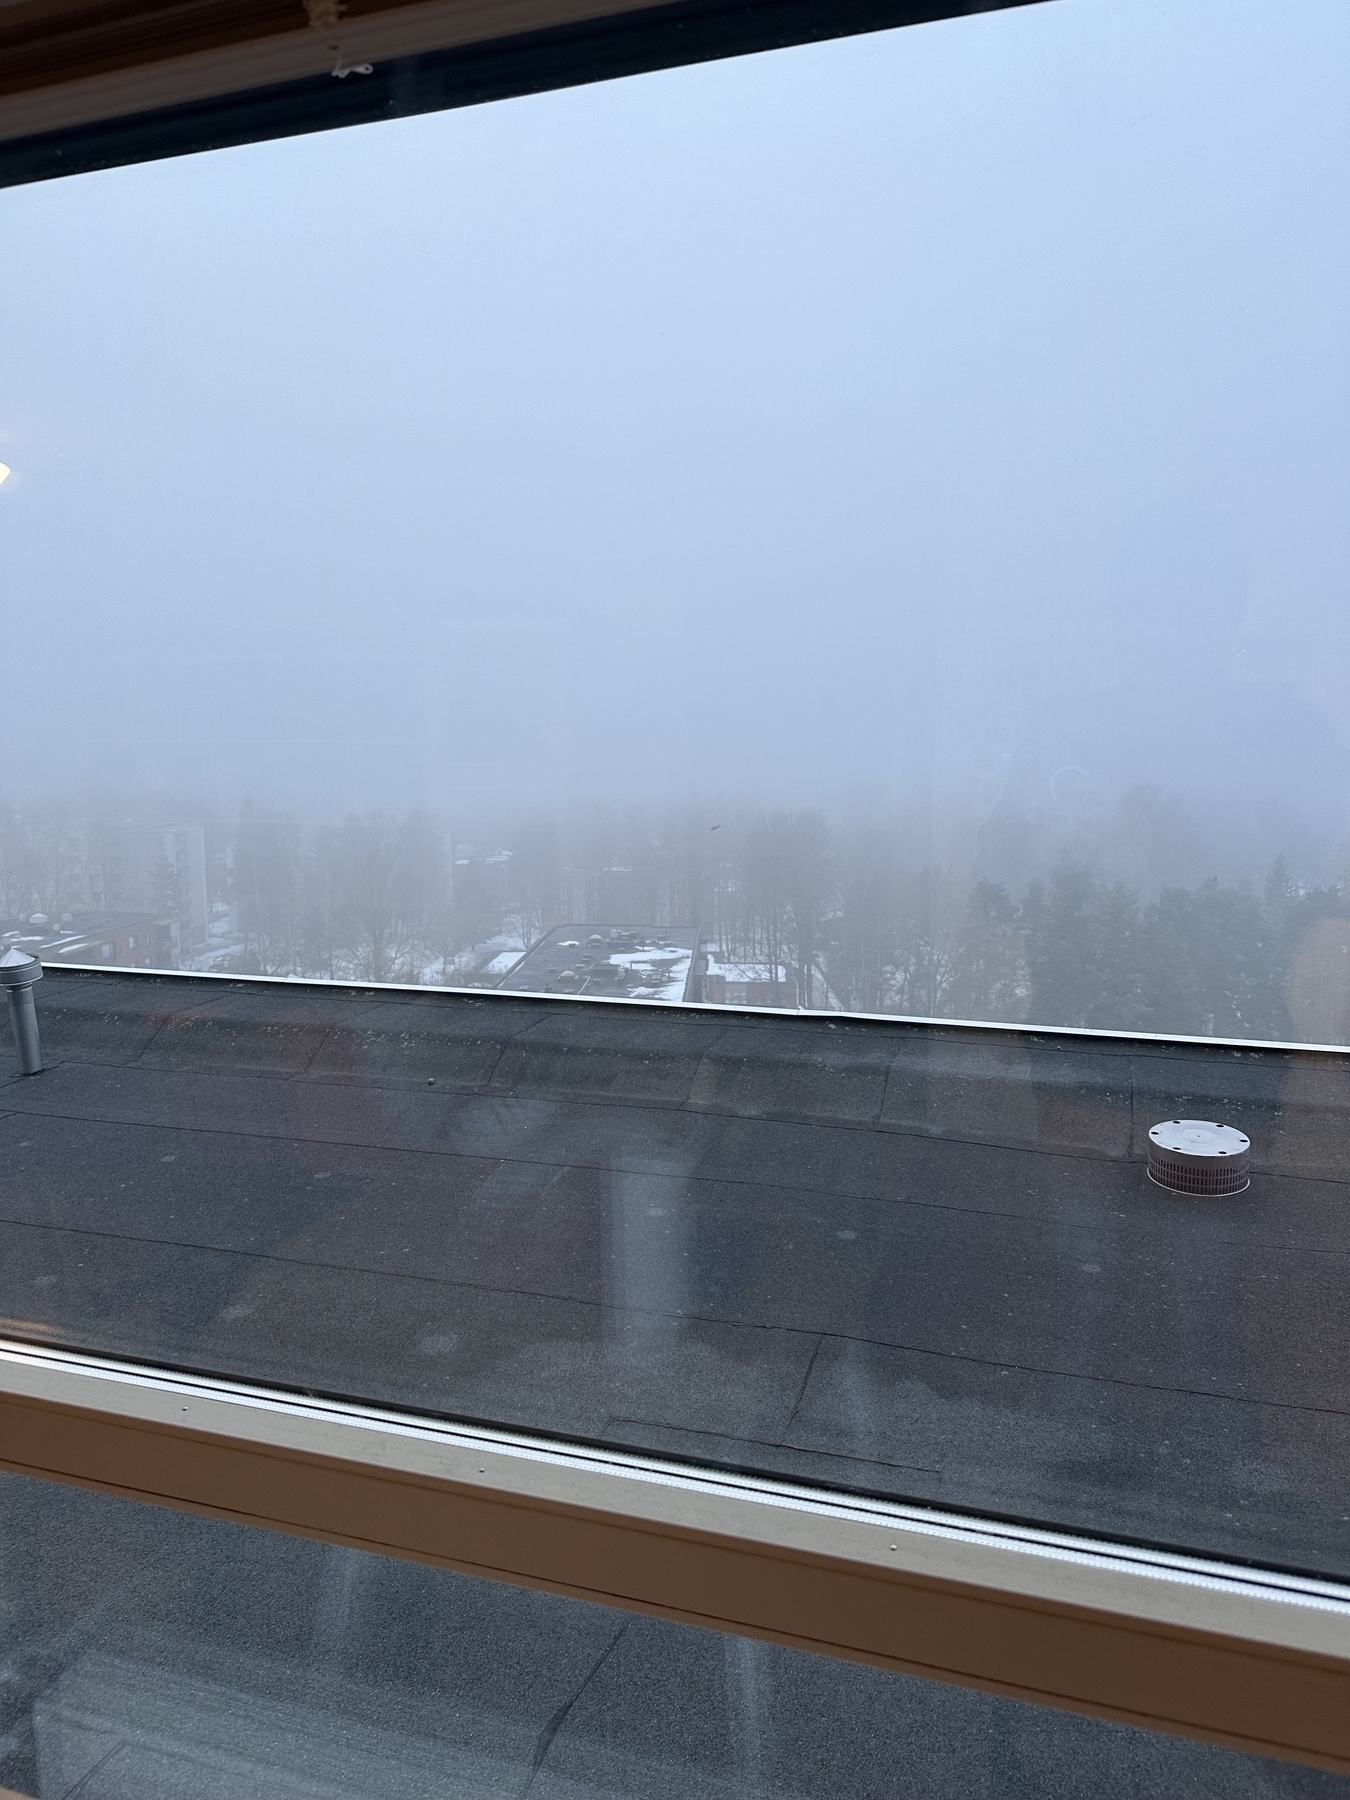 View out of window. It is extremely foggy out